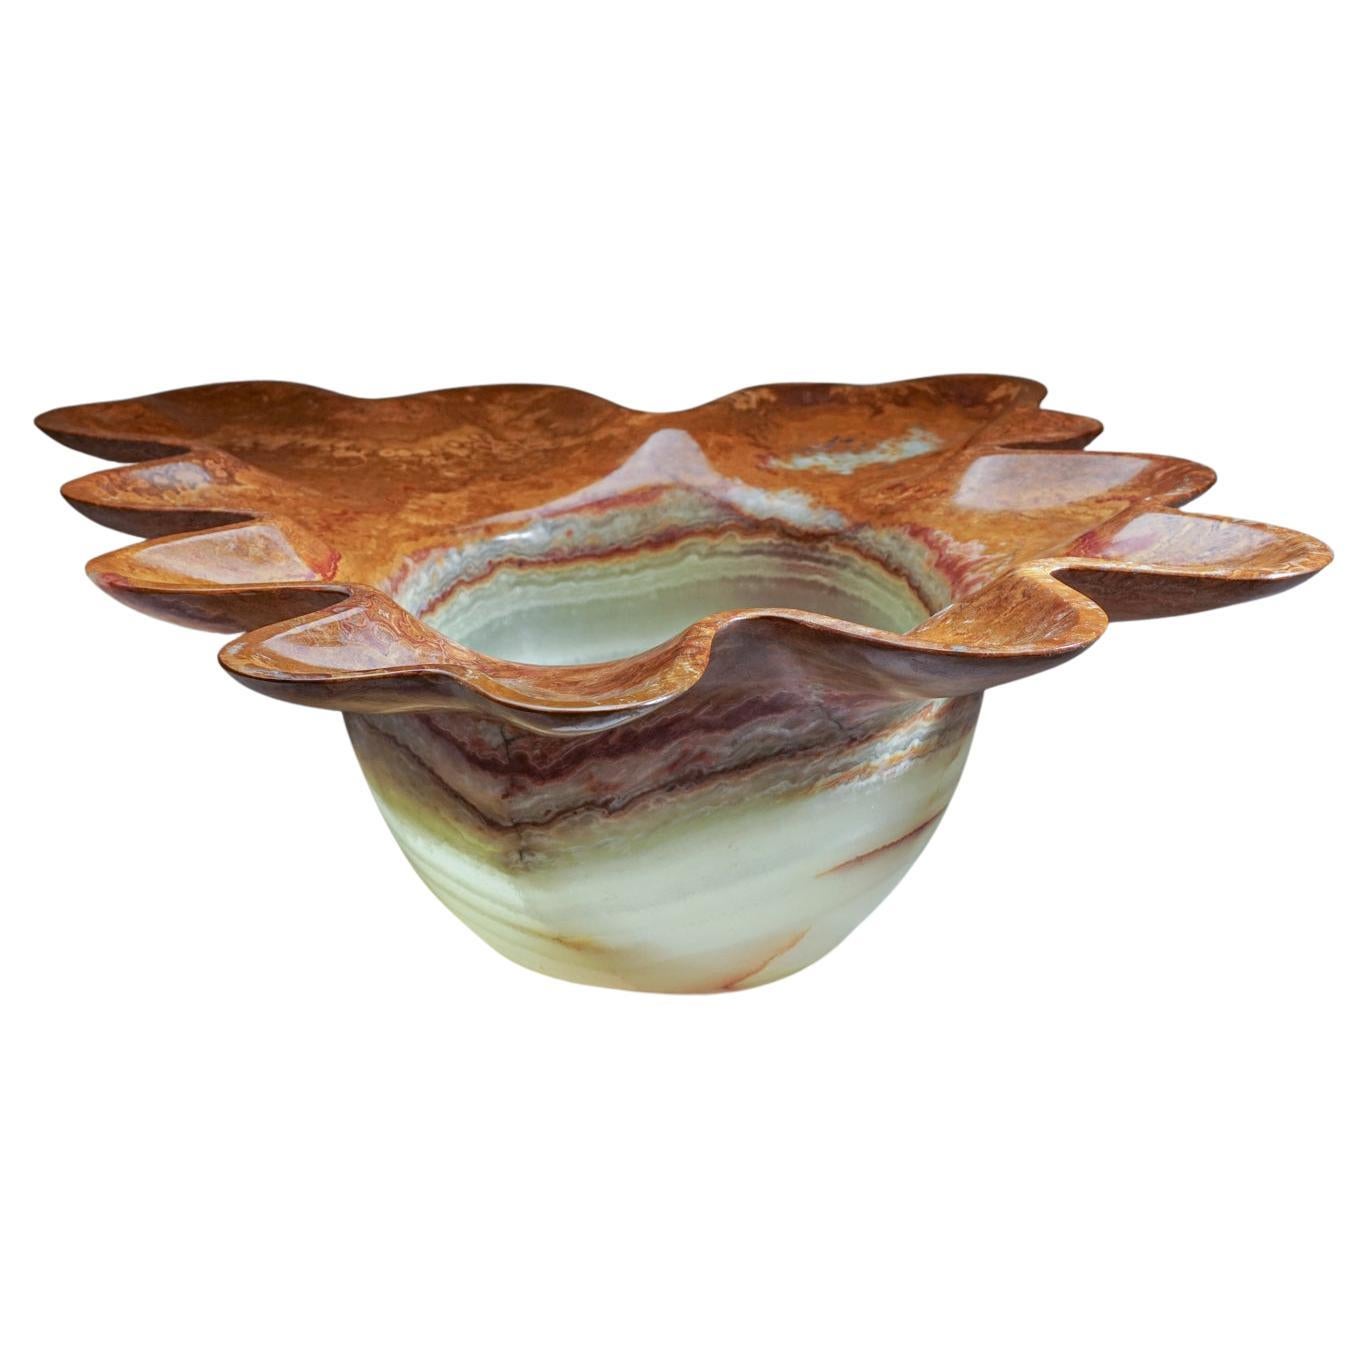 Green and Brown Onyx Decorative Bowl From Mexico ( 26" x 25" x 7", 34 lbs.)